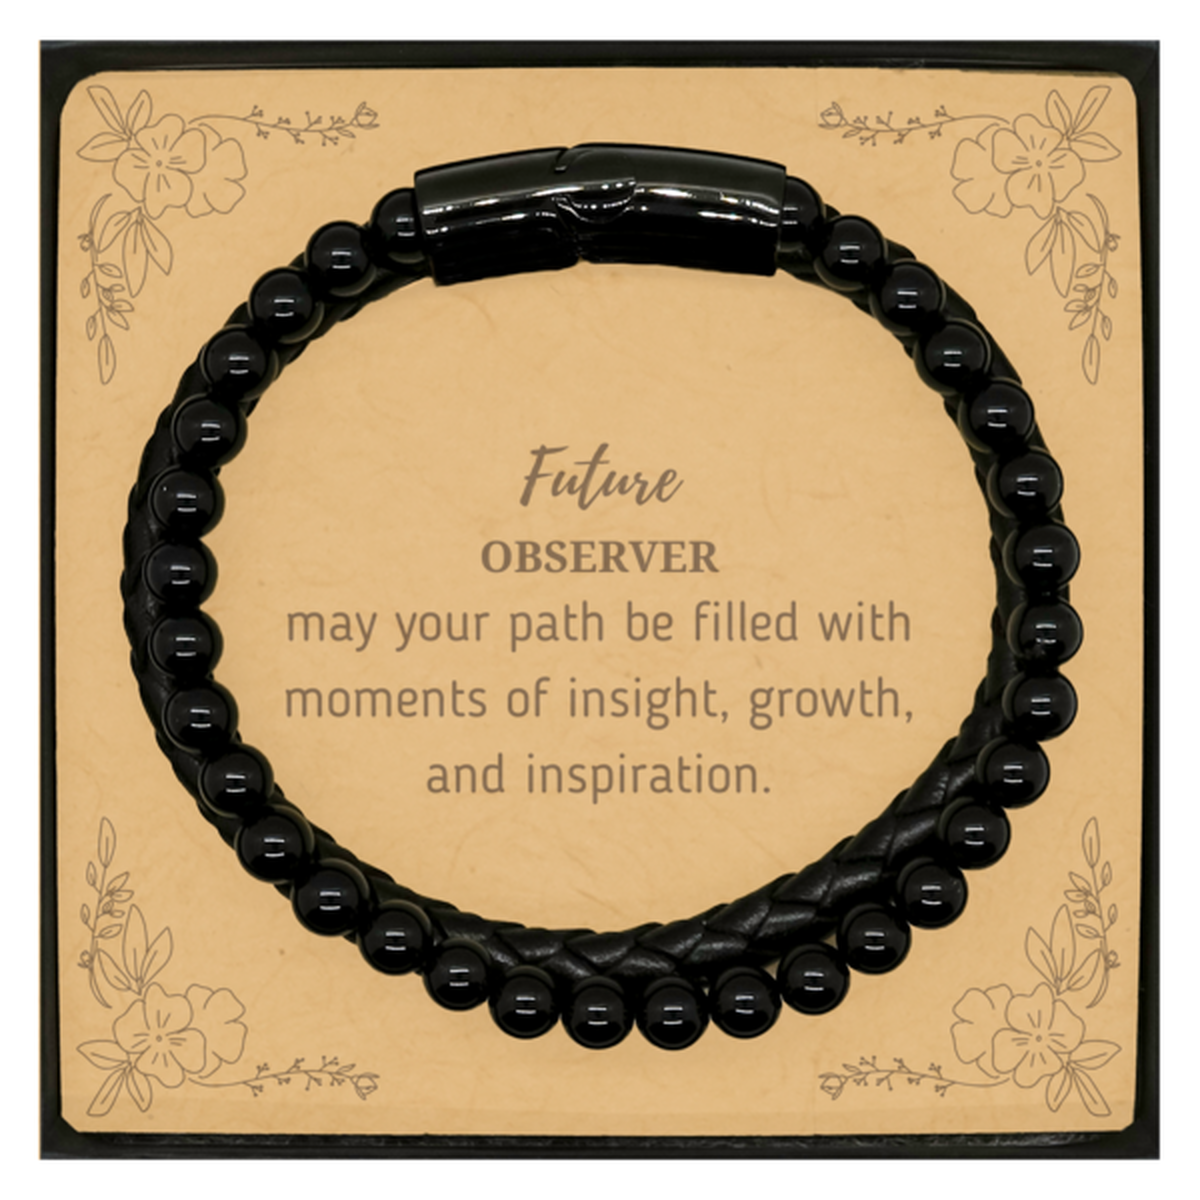 Future Observer Gifts, May your path be filled with moments of insight, Graduation Gifts for New Observer, Christmas Unique Stone Leather Bracelets For Men, Women, Friends